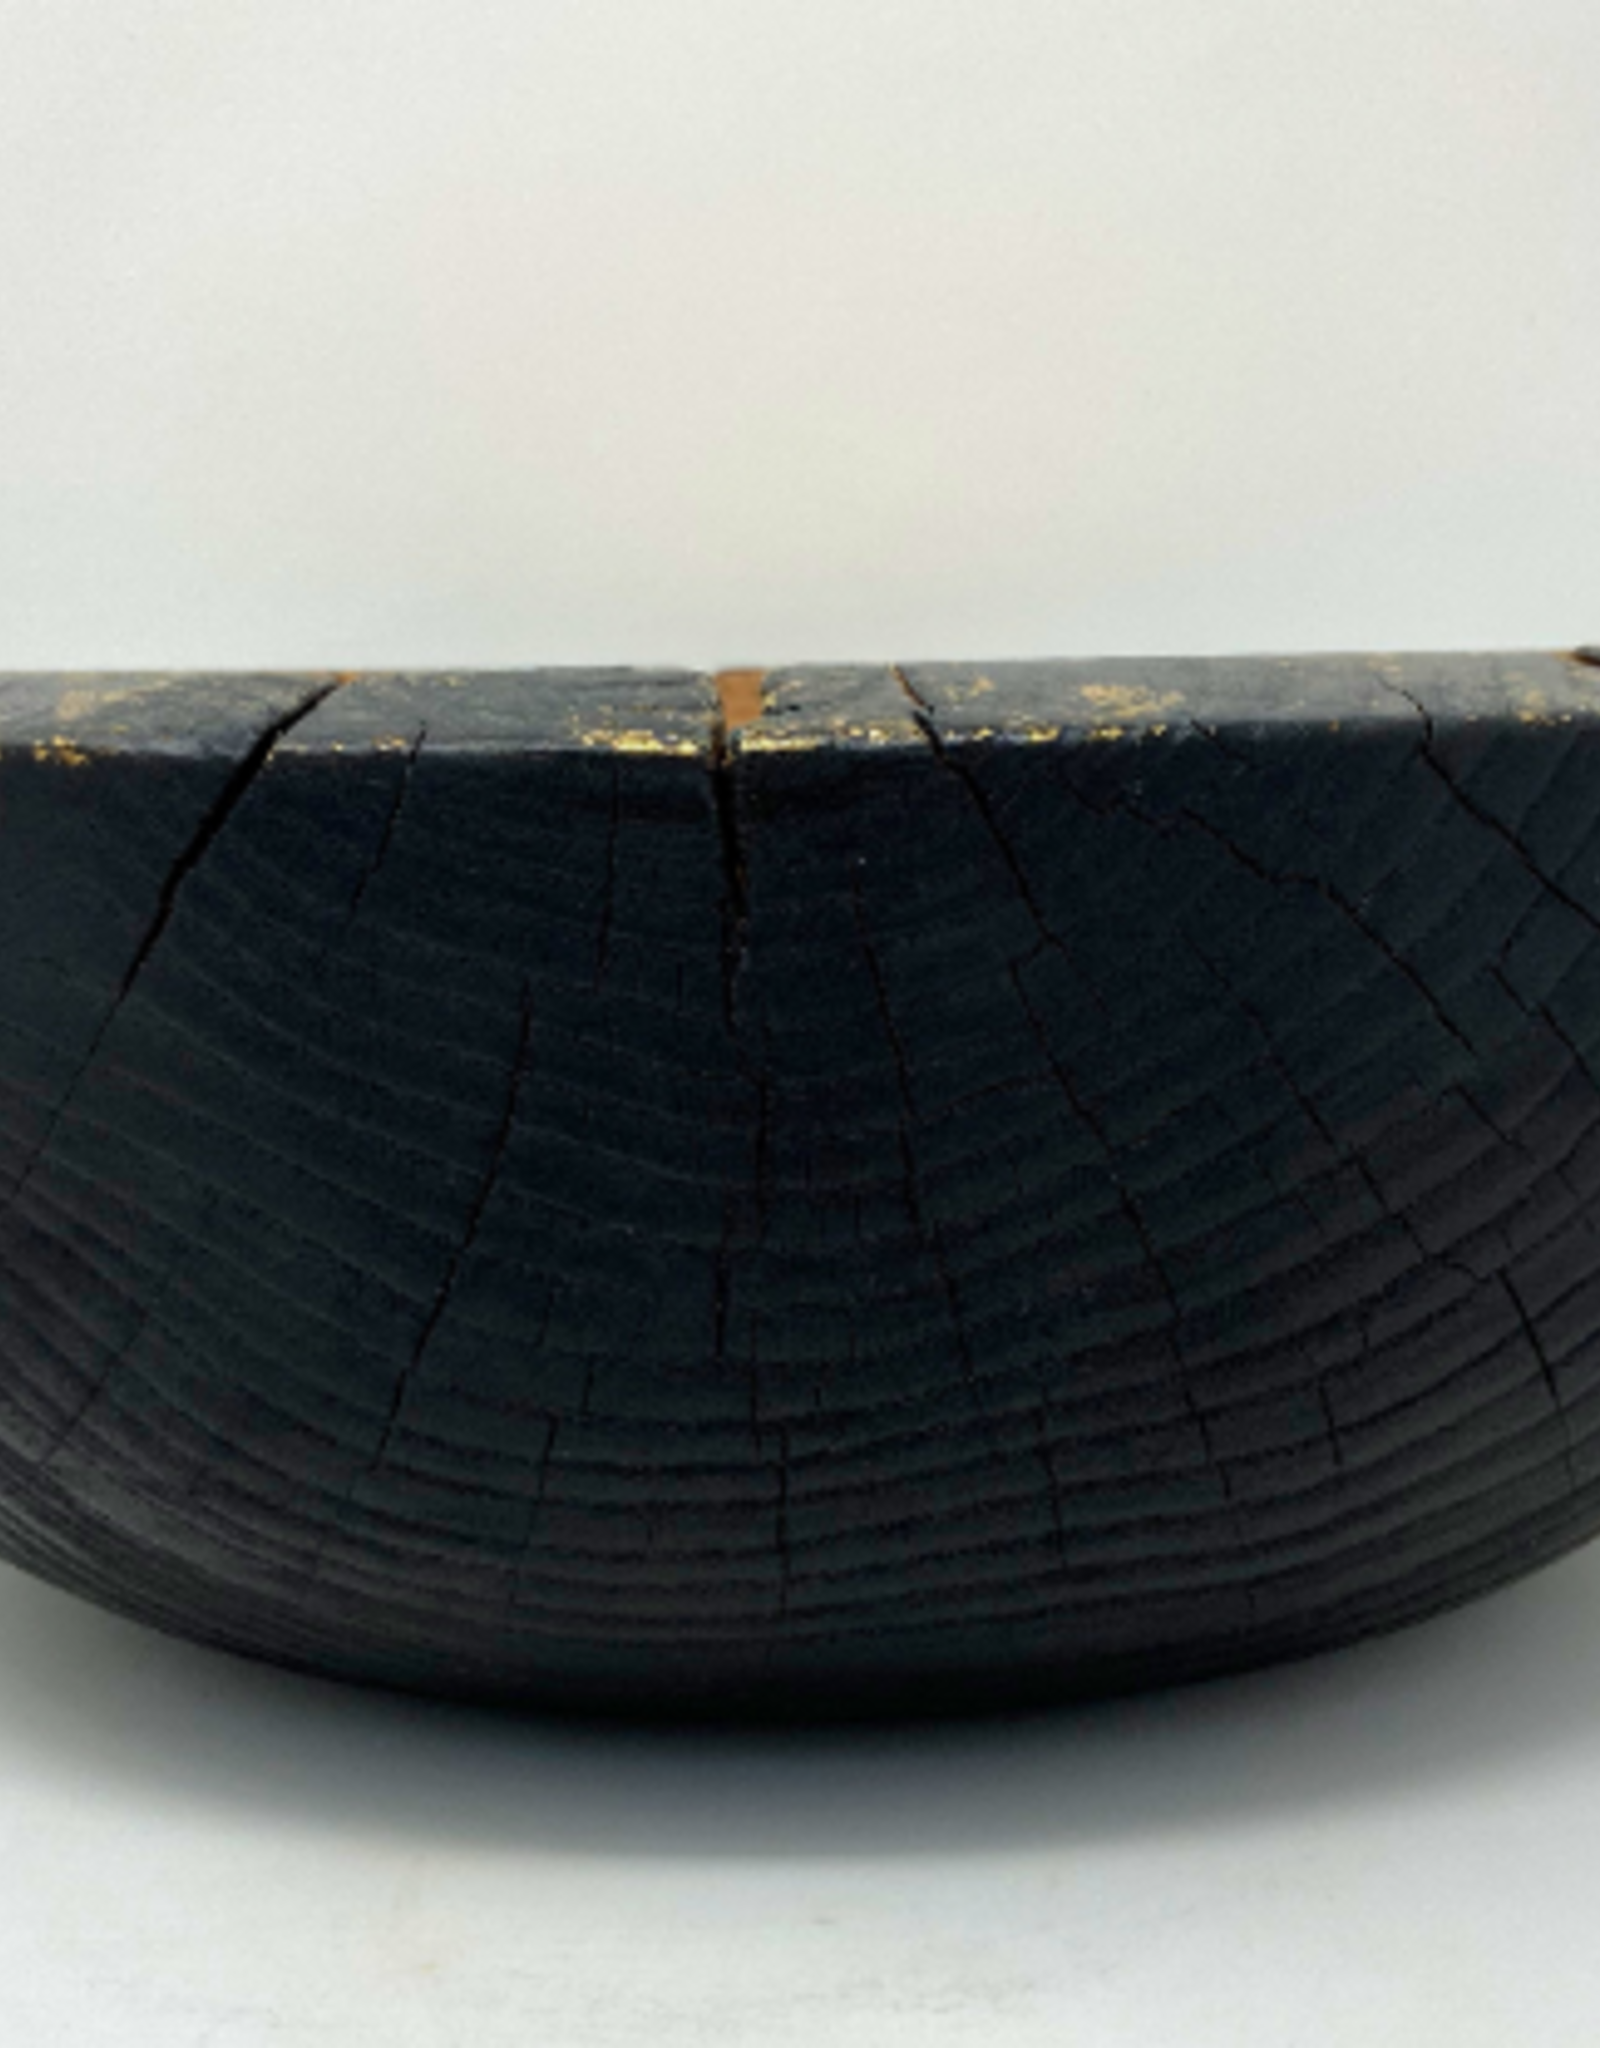 Ron and Ellie Purvis Mt. Hood Craft - "Gilded Coal" - Hand Turned Charred Ash Wood Bowl